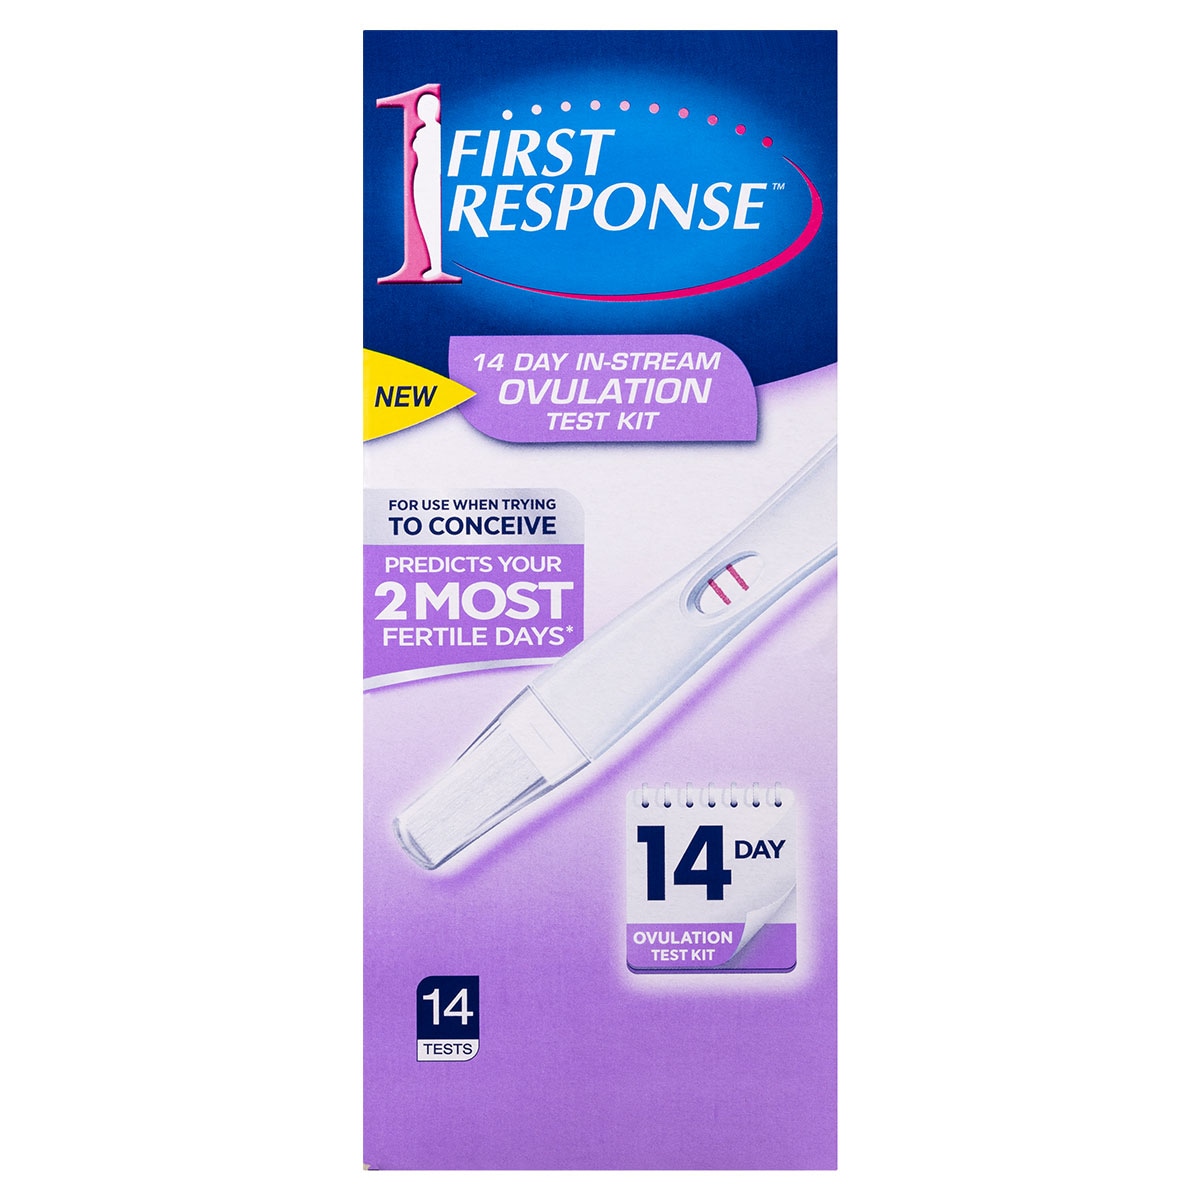 First Response 14 Day In Stream Ovulation Test Kit